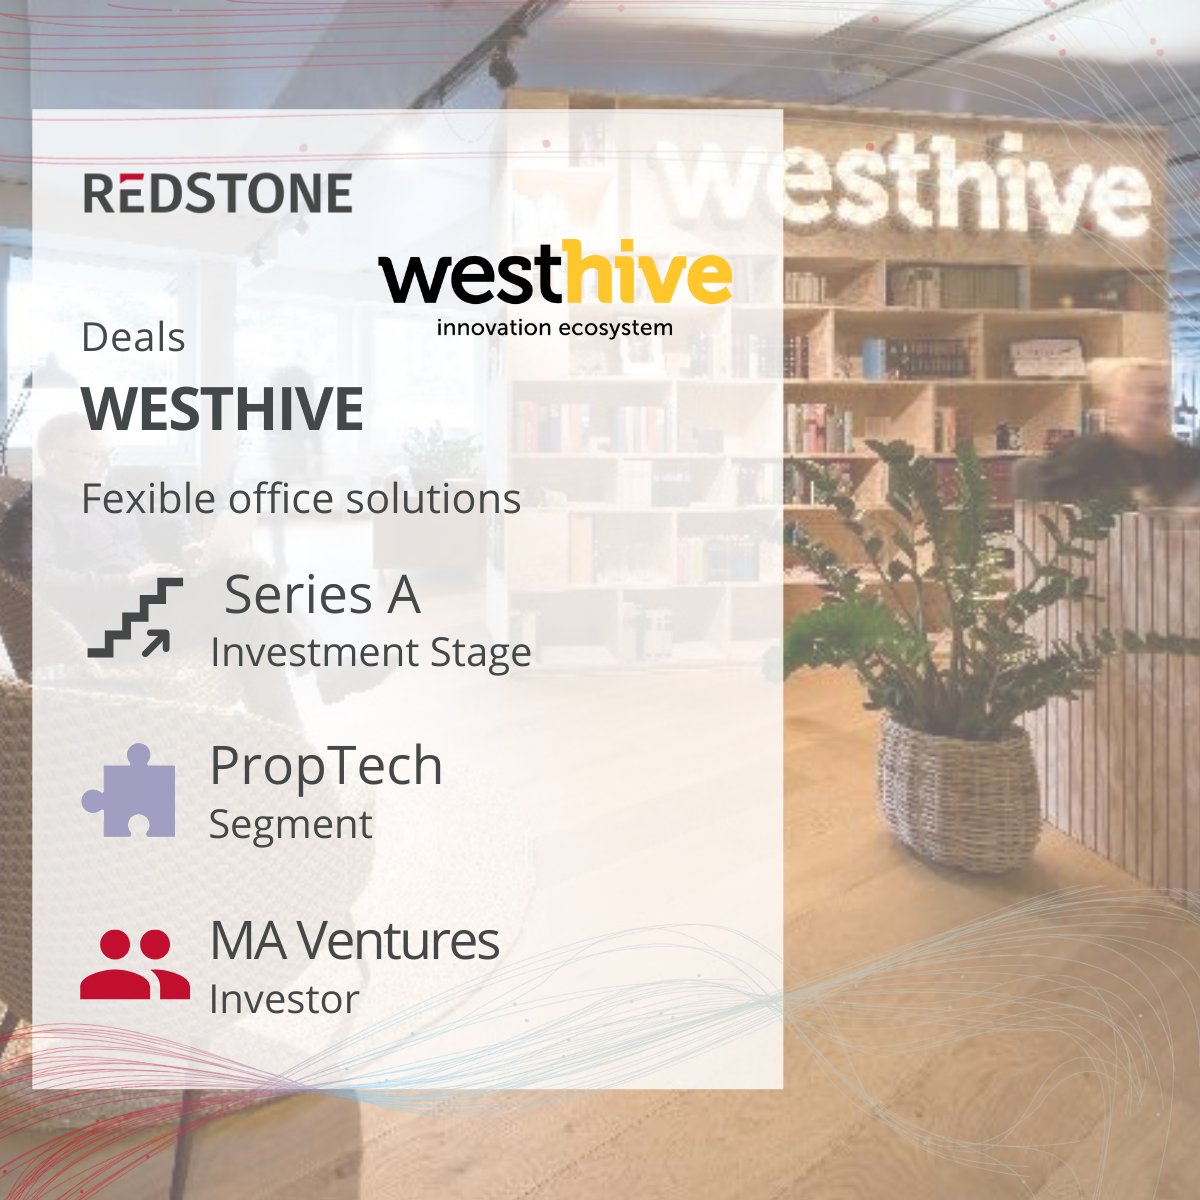 We are very pleased to welcome @Westhive to the Redstone family! The round is co-led by the Fairway family office and Redstone powered MAVentures, the corporate venture capital fund with @MigrosAare. #VentureCapital #portfolio #PropTech